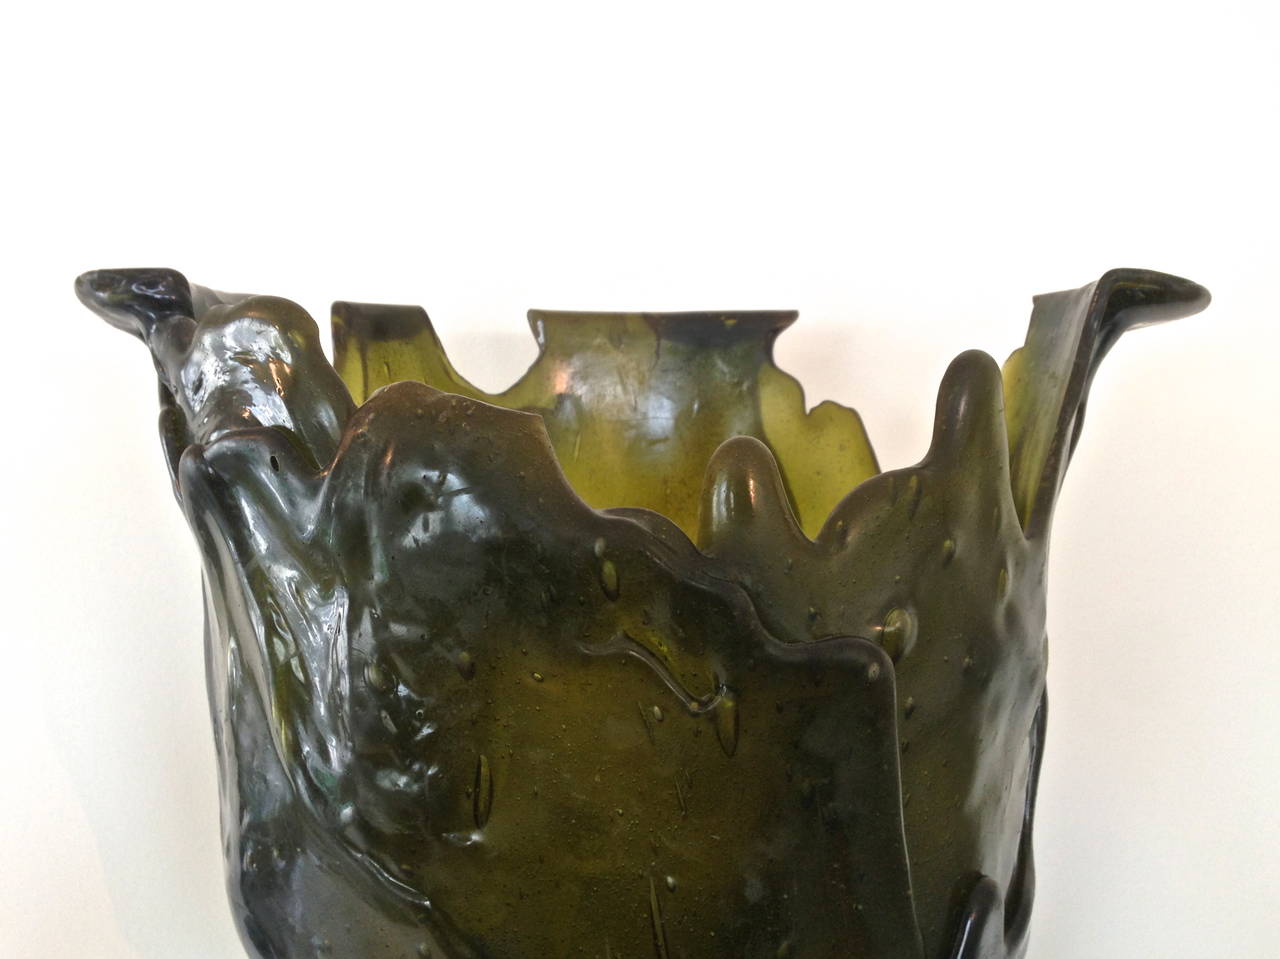 Amazonia vase in beautiful dark green resin by Gaetano Pesce fabricated by Fish Design NYC sometime between 1995 and 1998; has had only one owner.